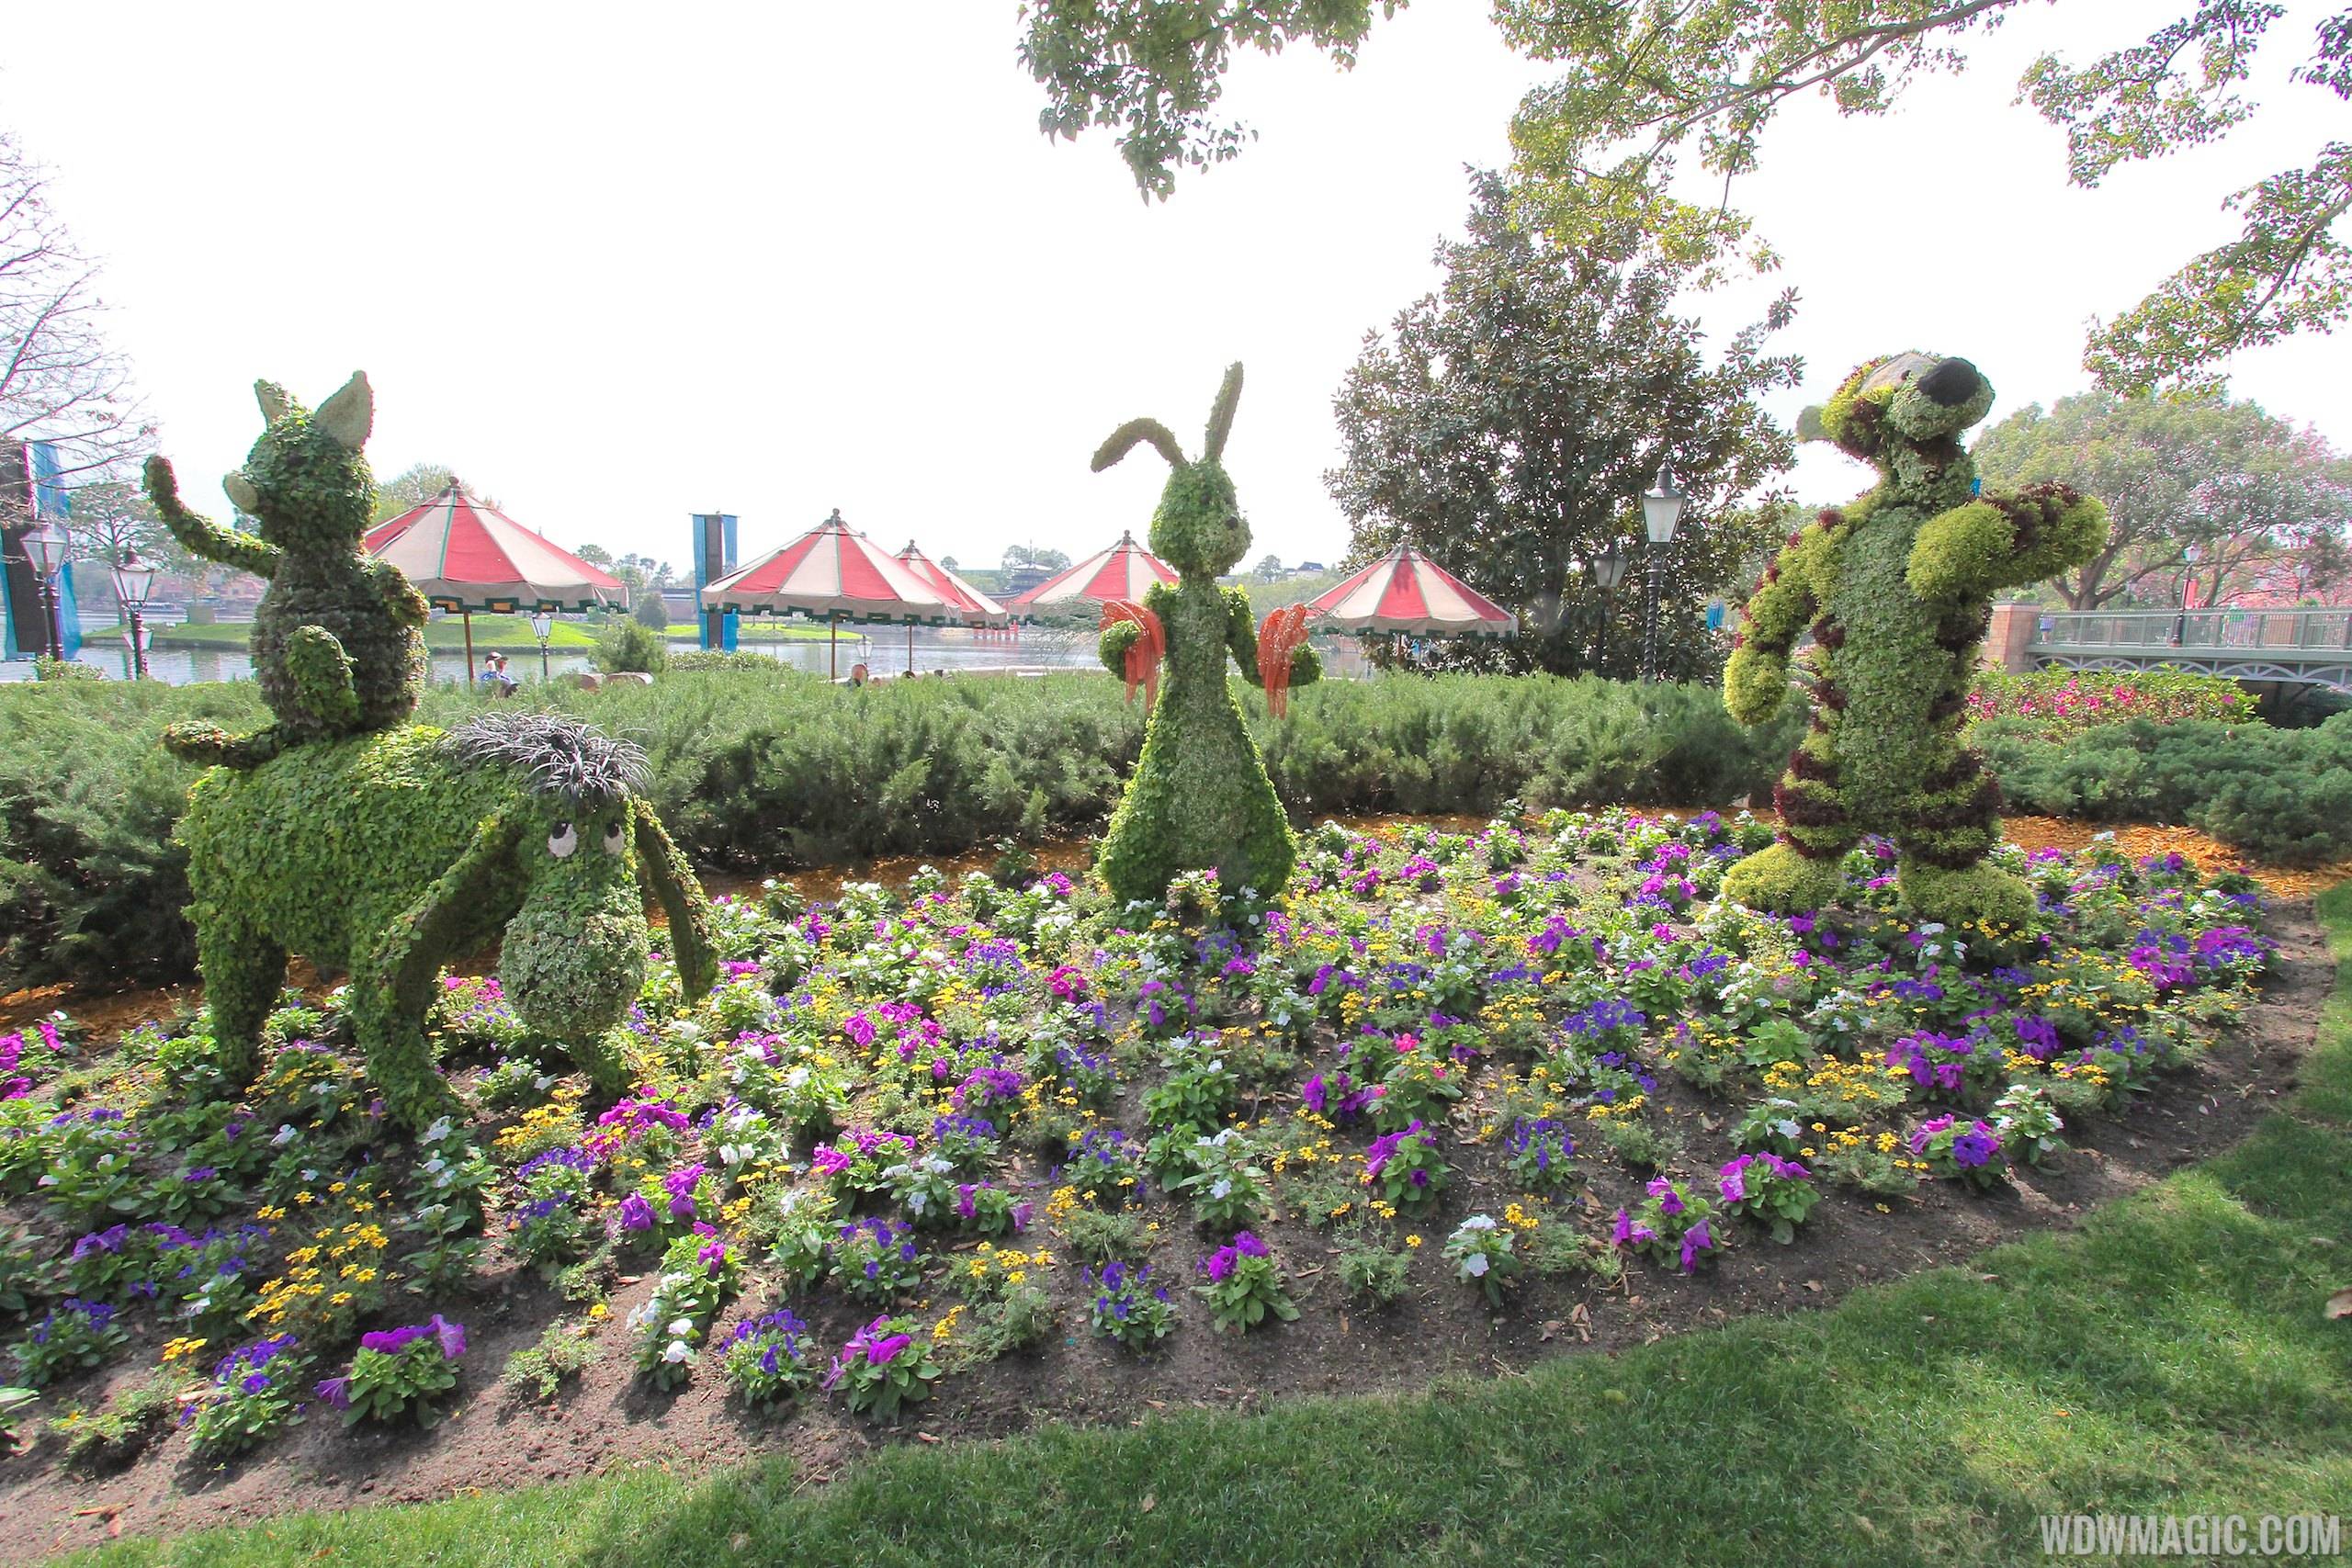 2014 Epcot Flower and Garden Festival - Winnie the Pooh topiary at the UK Pavilion